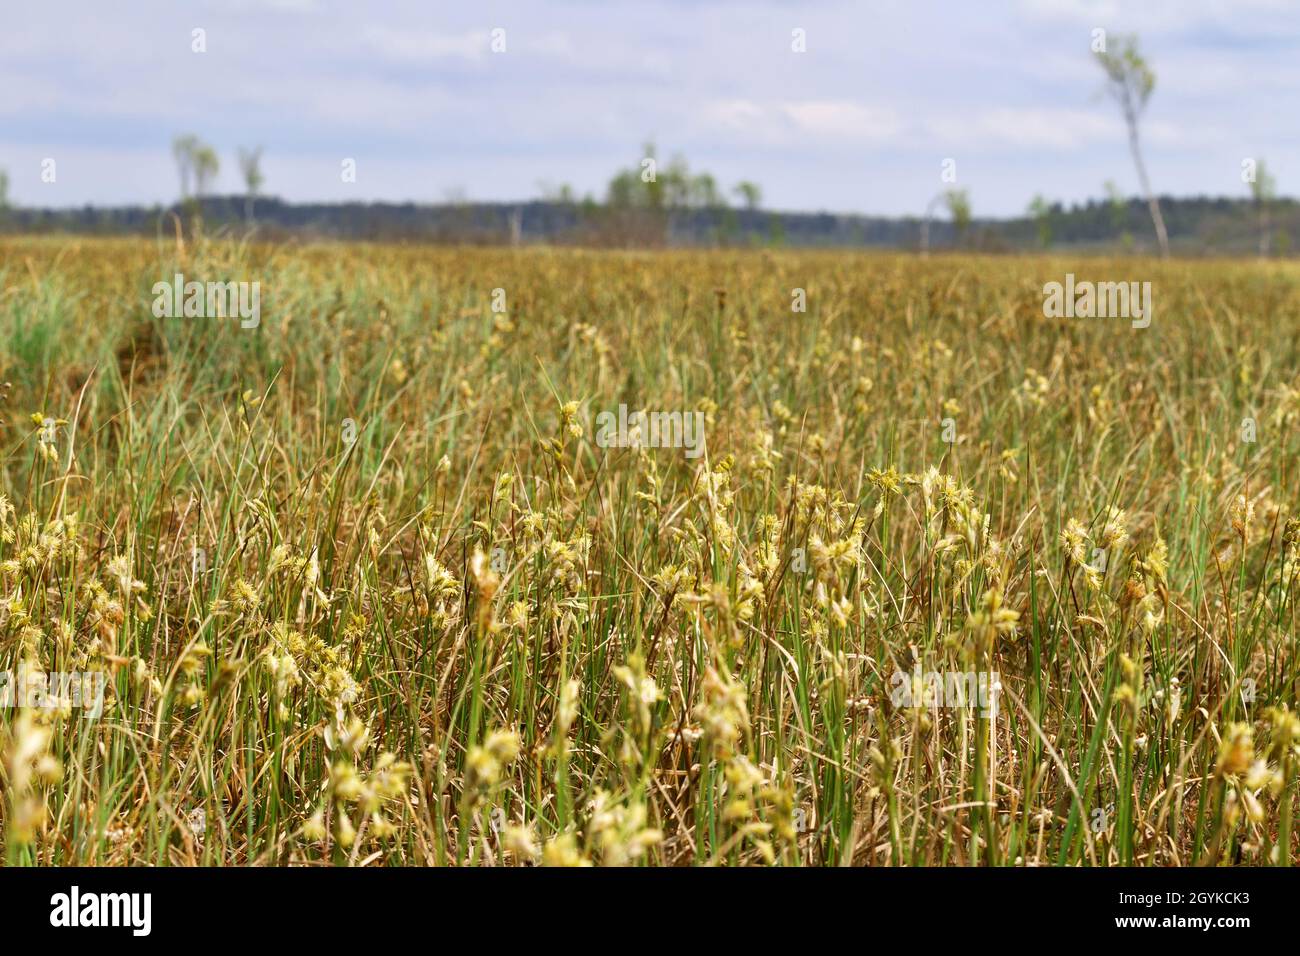 Mesotrophic peat-land (transition moor) in the north-east of Europe. In the foreground is a flowering sedge, probably mud sedge (Carex limosa). May, g Stock Photo